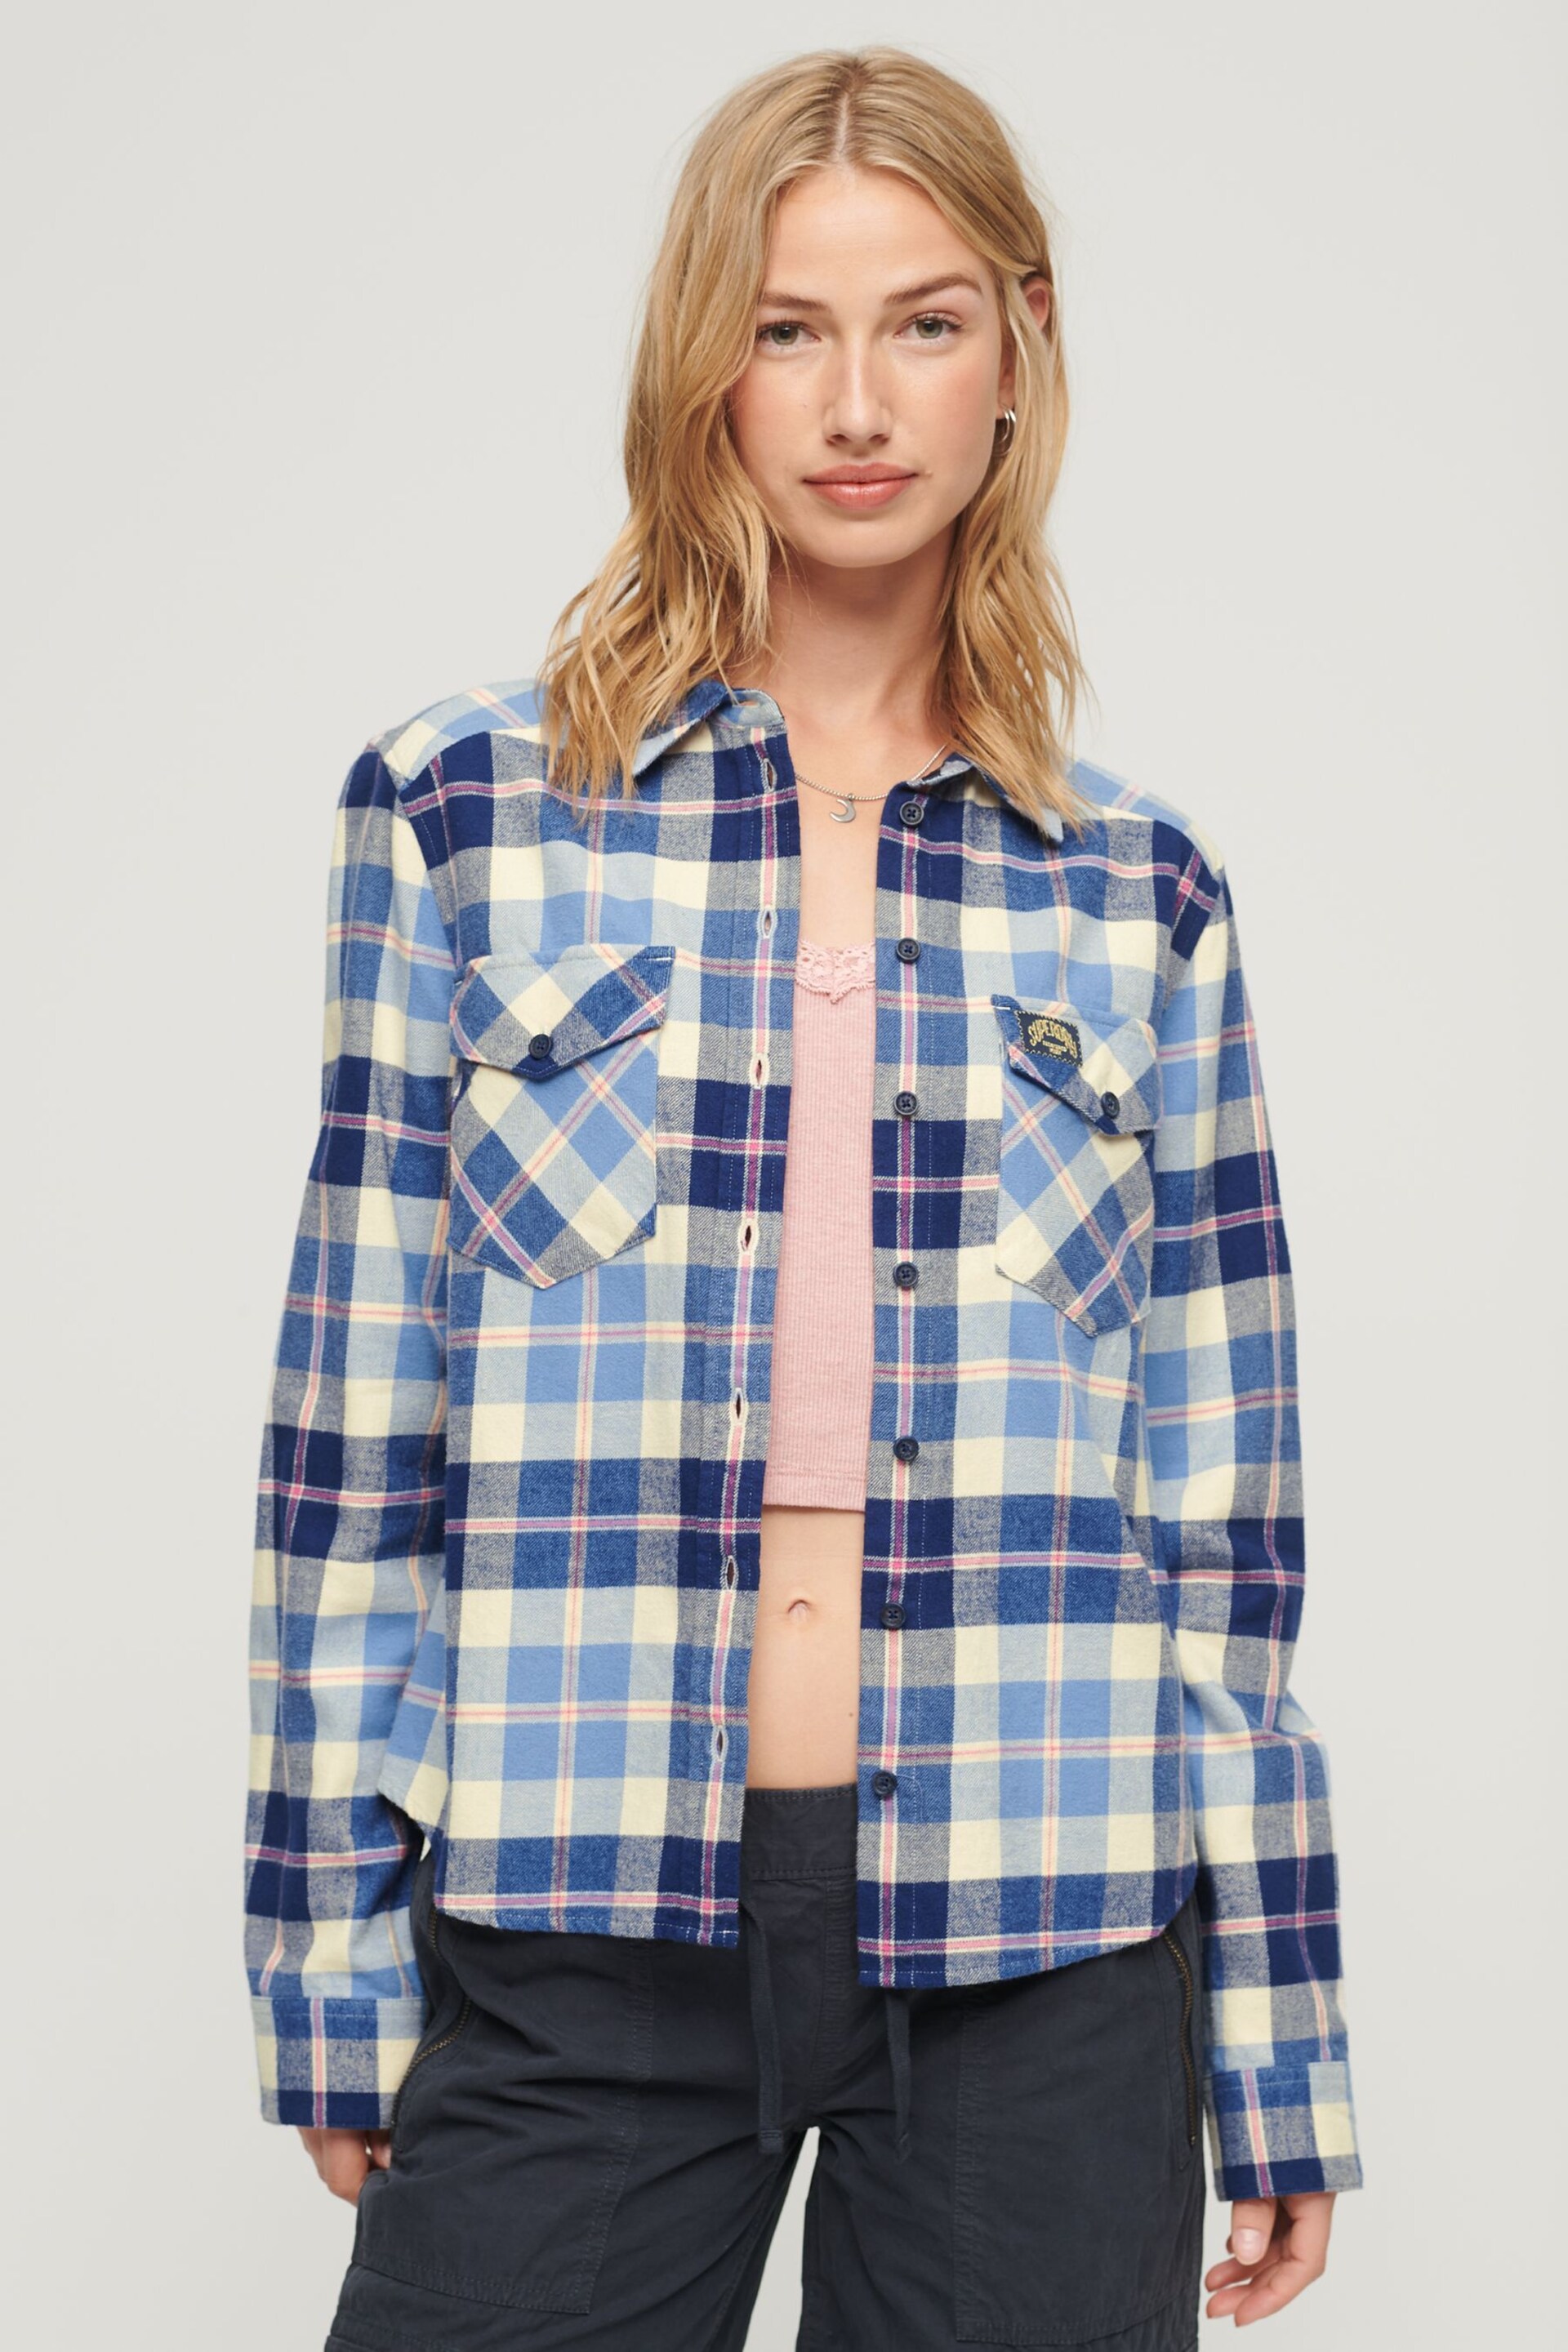 Superdry Blue Lumberjack Check Flannel Shirt - Image 1 of 3